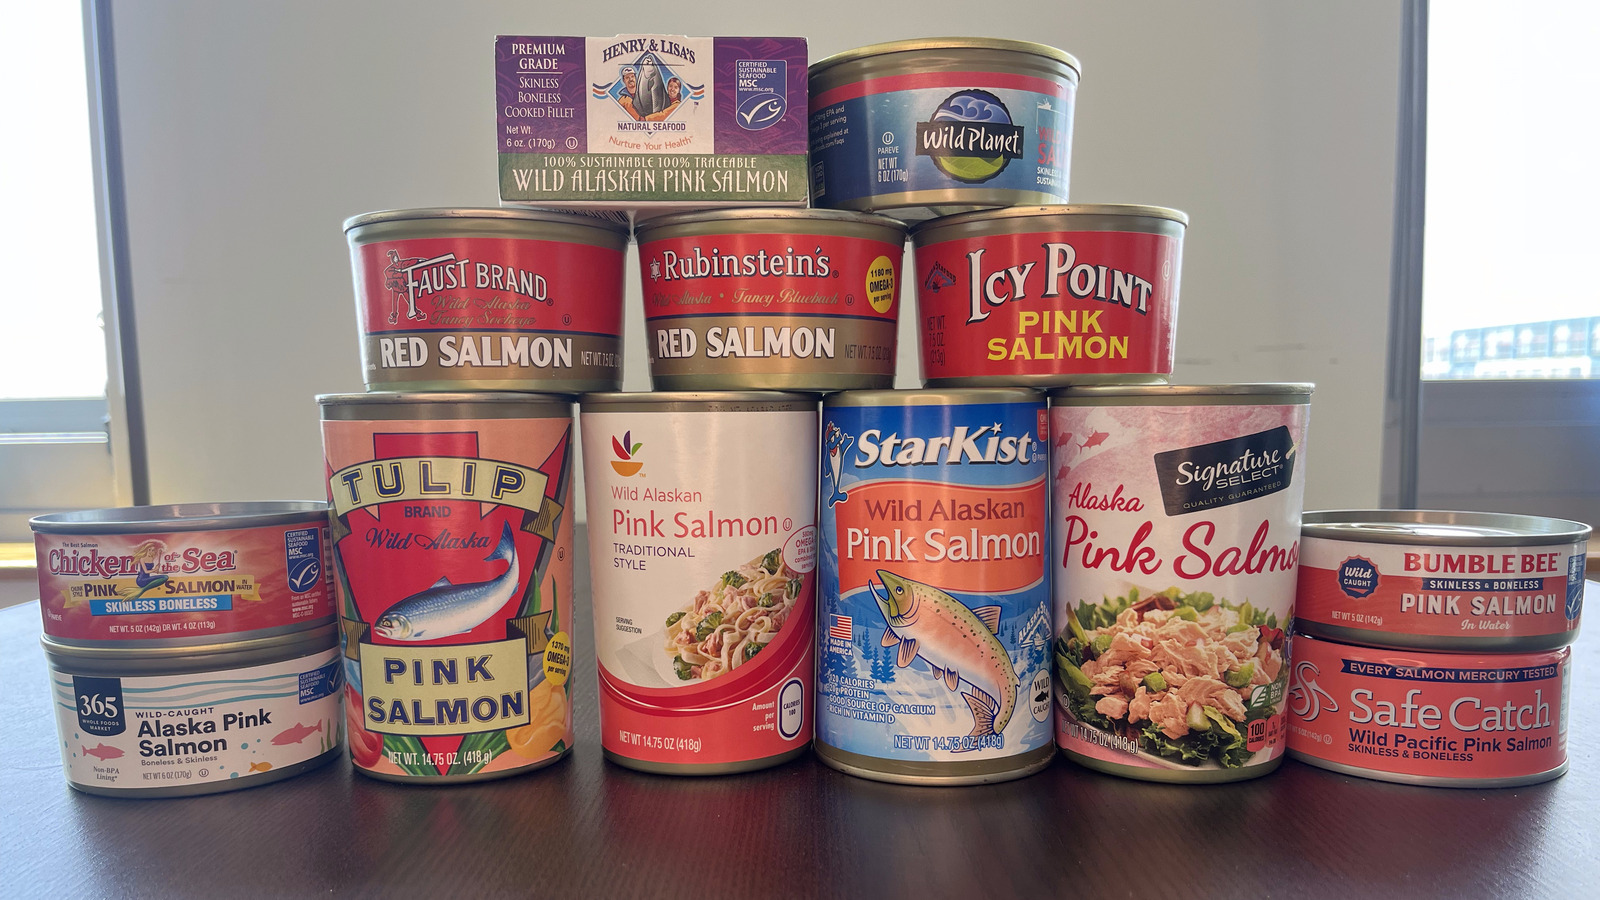 Top 10 facts about tins for Canned Food Week